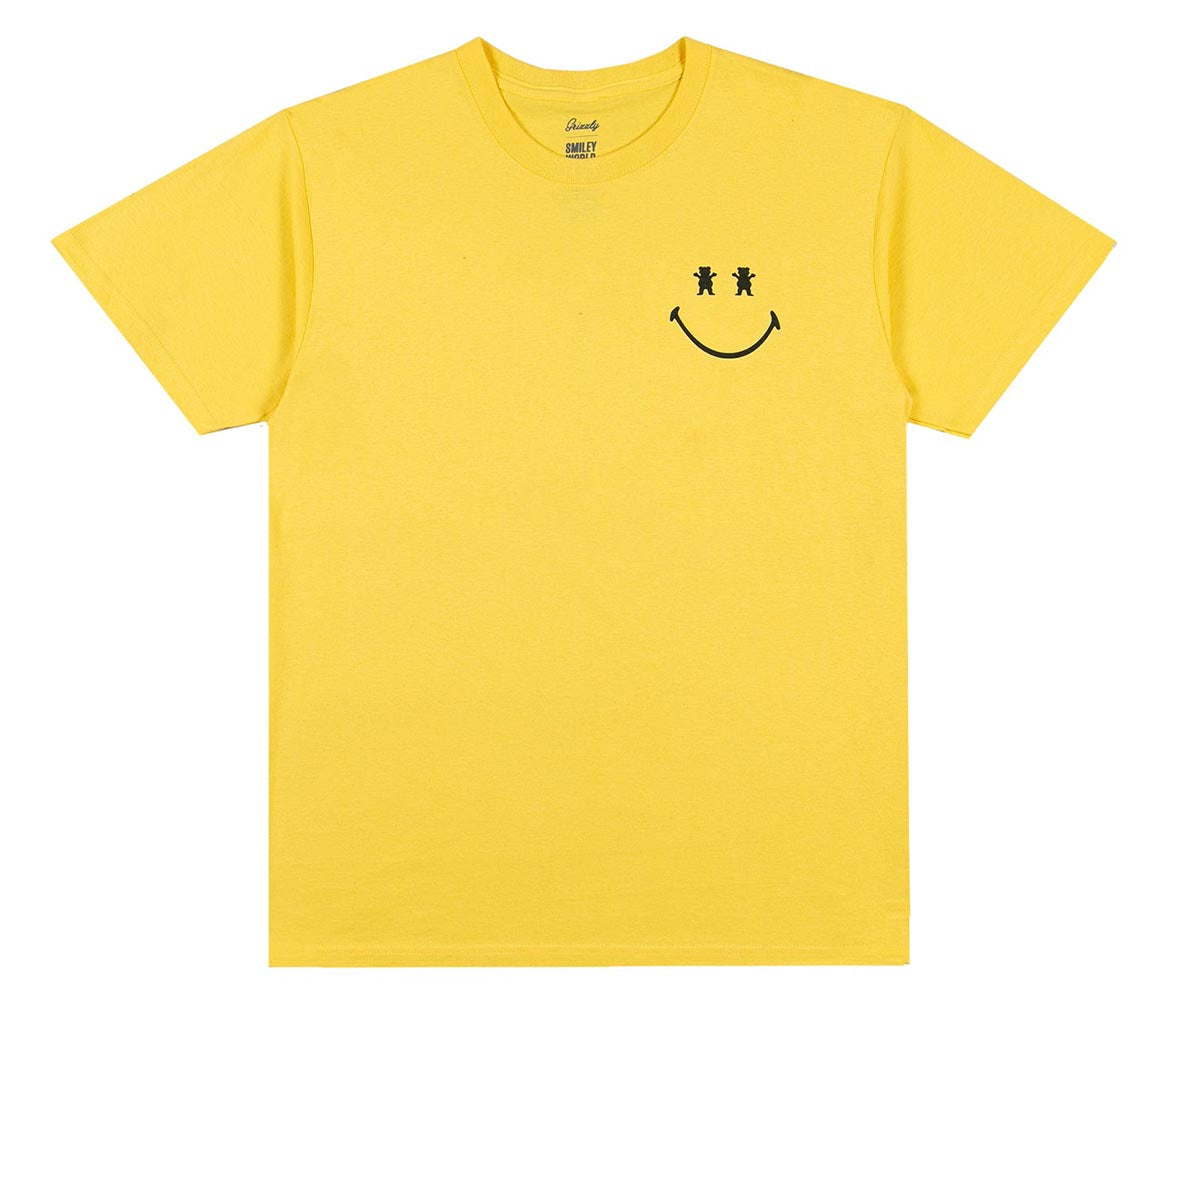 Grizzly x Smiley World Big Smile T-Shirt - Yellow image 1